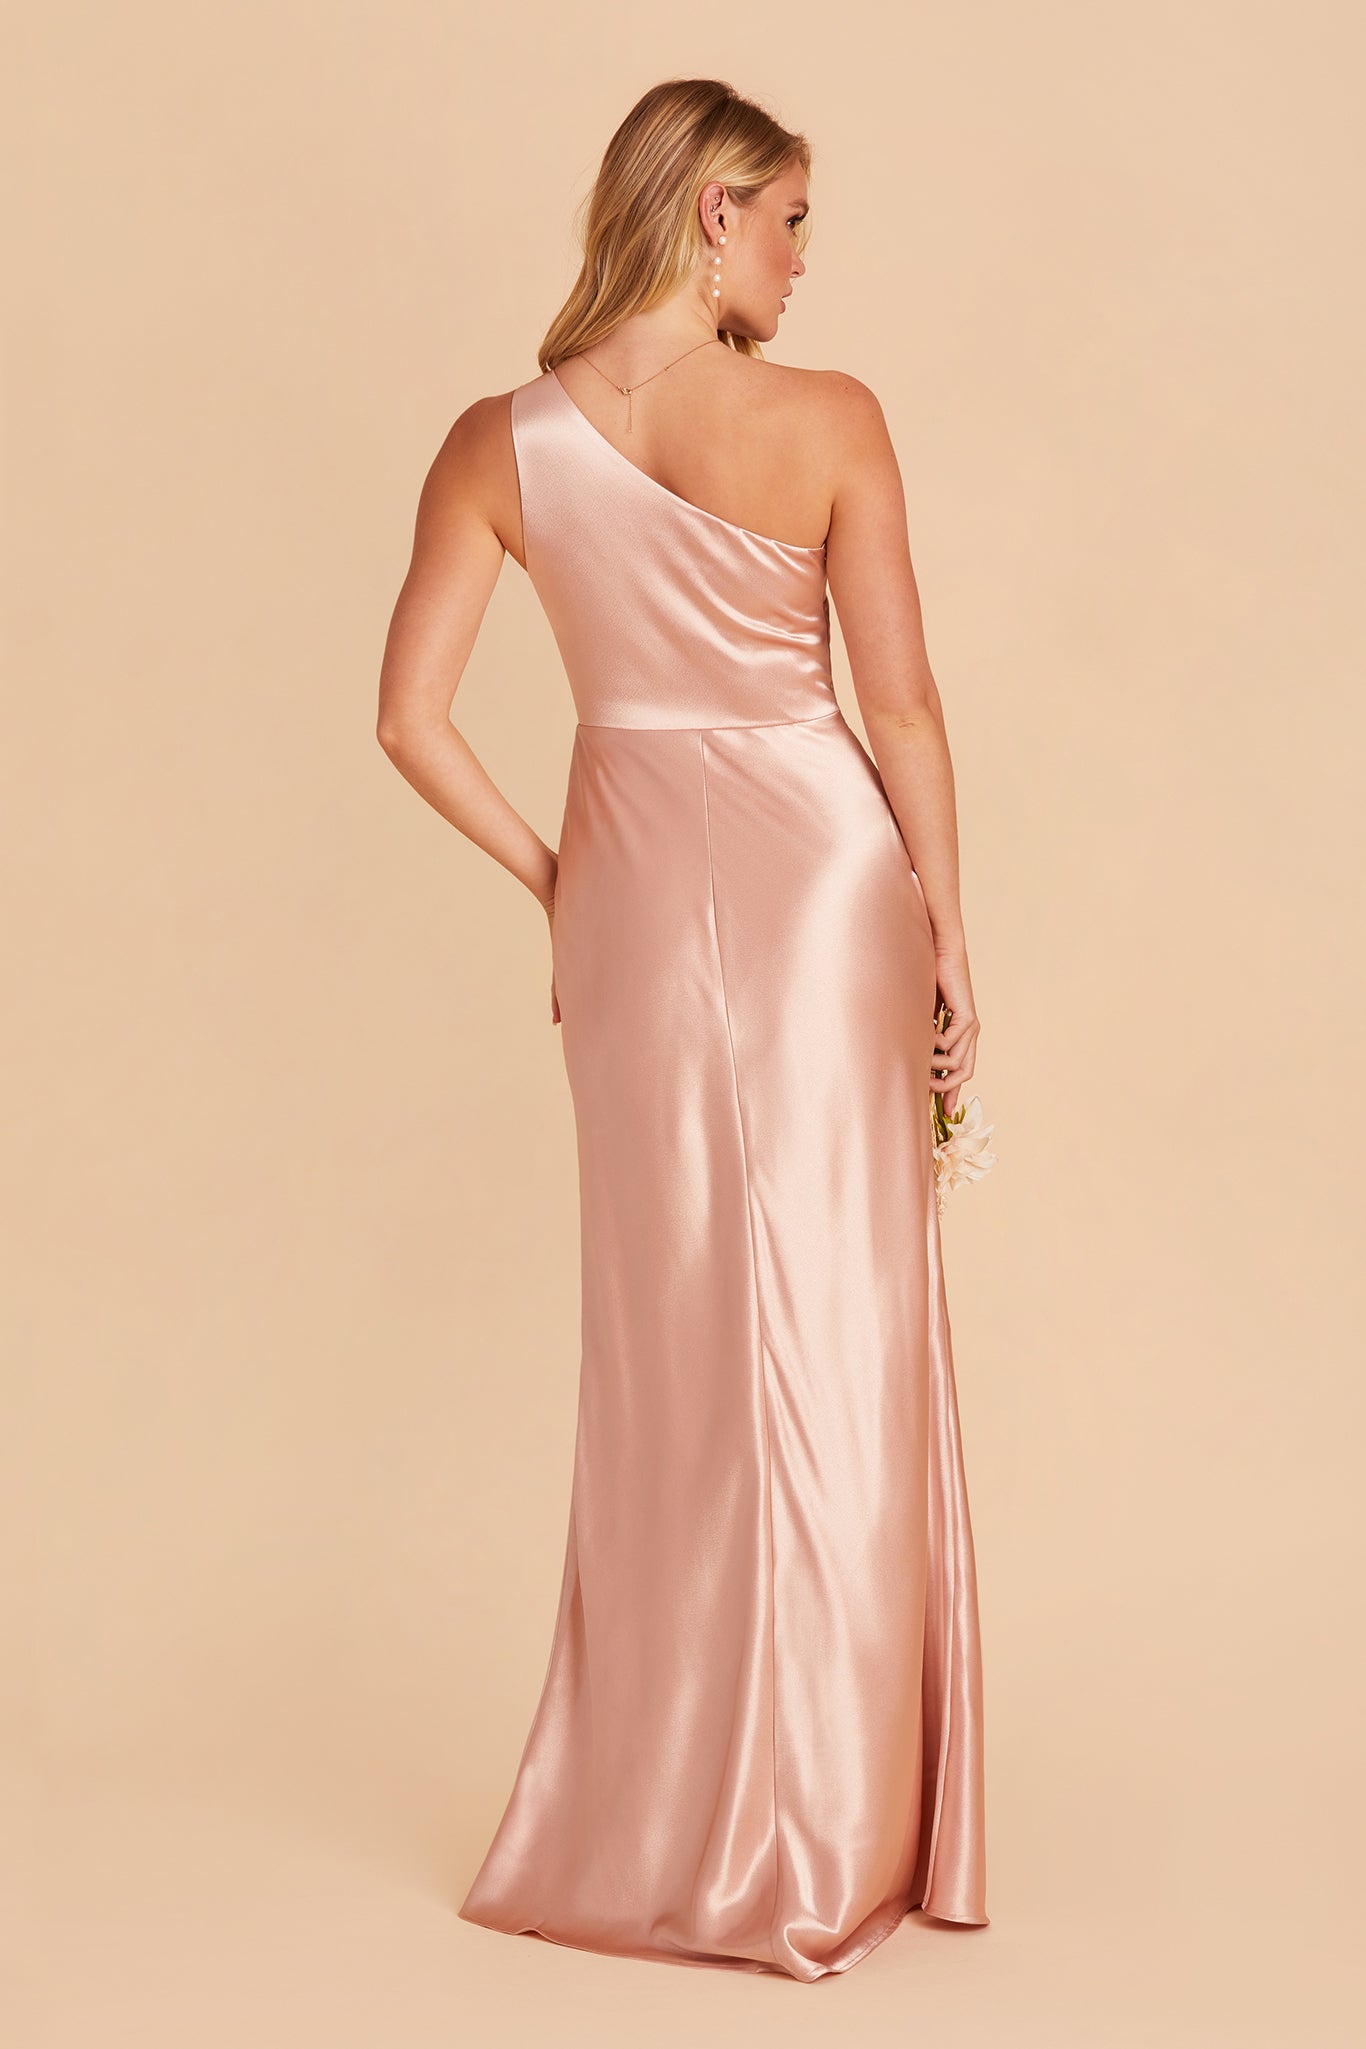 Kira bridesmaid dress with slit in rose gold satin by Birdy Grey, back view